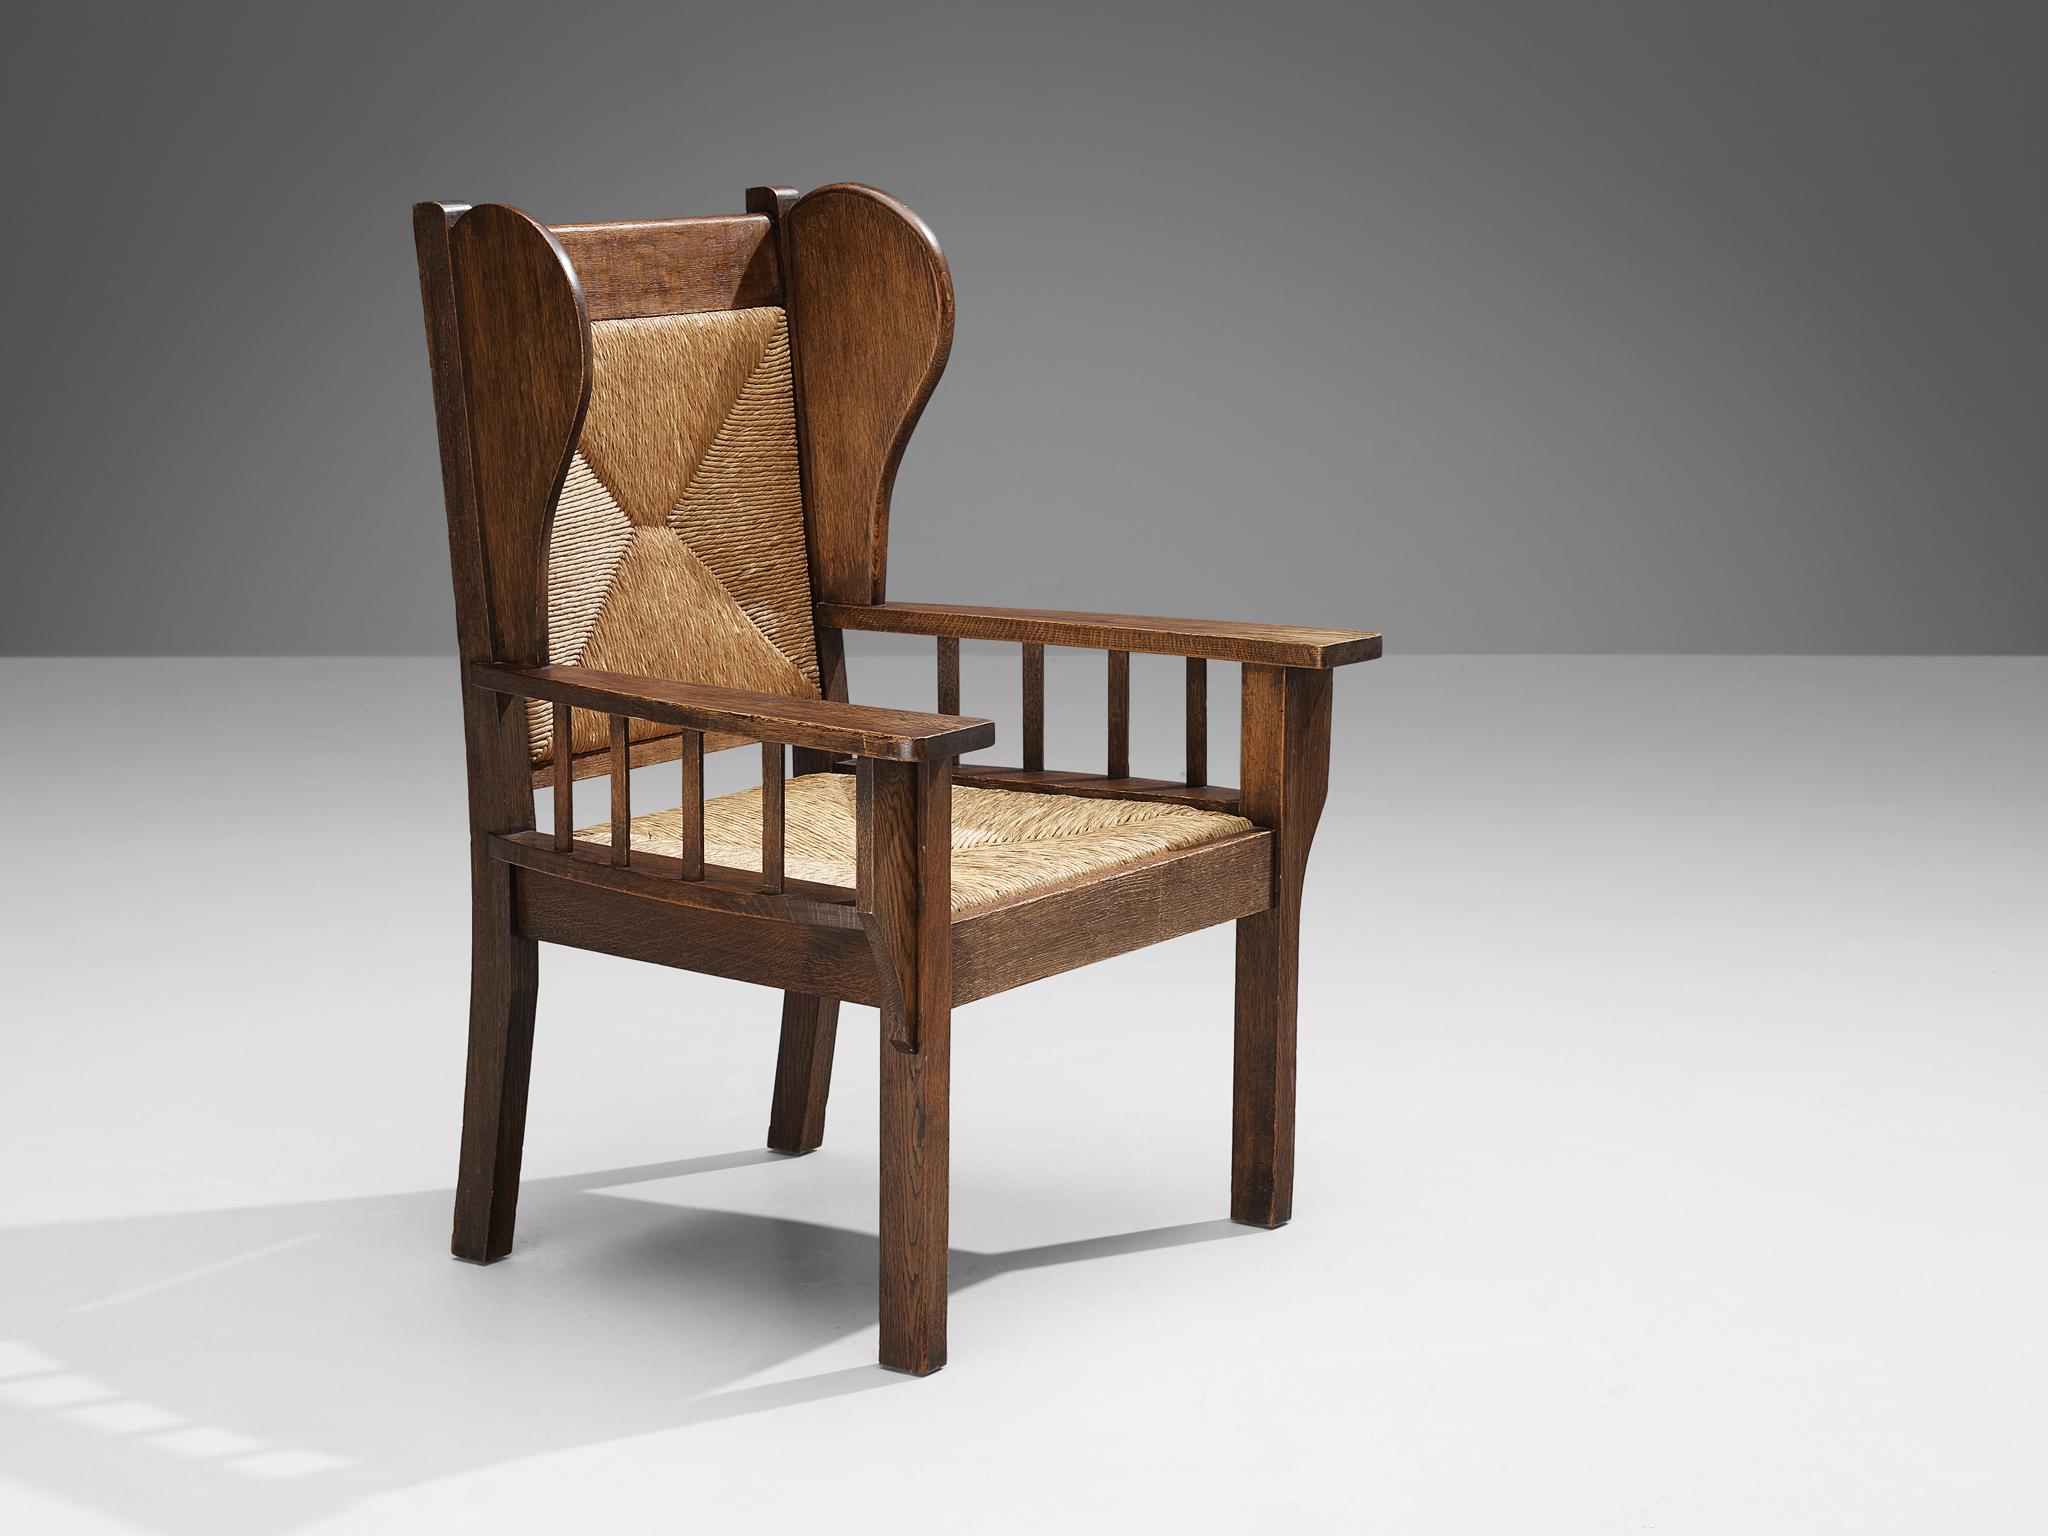 Armchair, oak, rush, Europe, 1940s 

Monumental armchair in oak with a strong presence and appearance. This stately piece is executed in oak and rush and was made in Europe in the 1940s. Its broad armrests and the subtle winged back create this